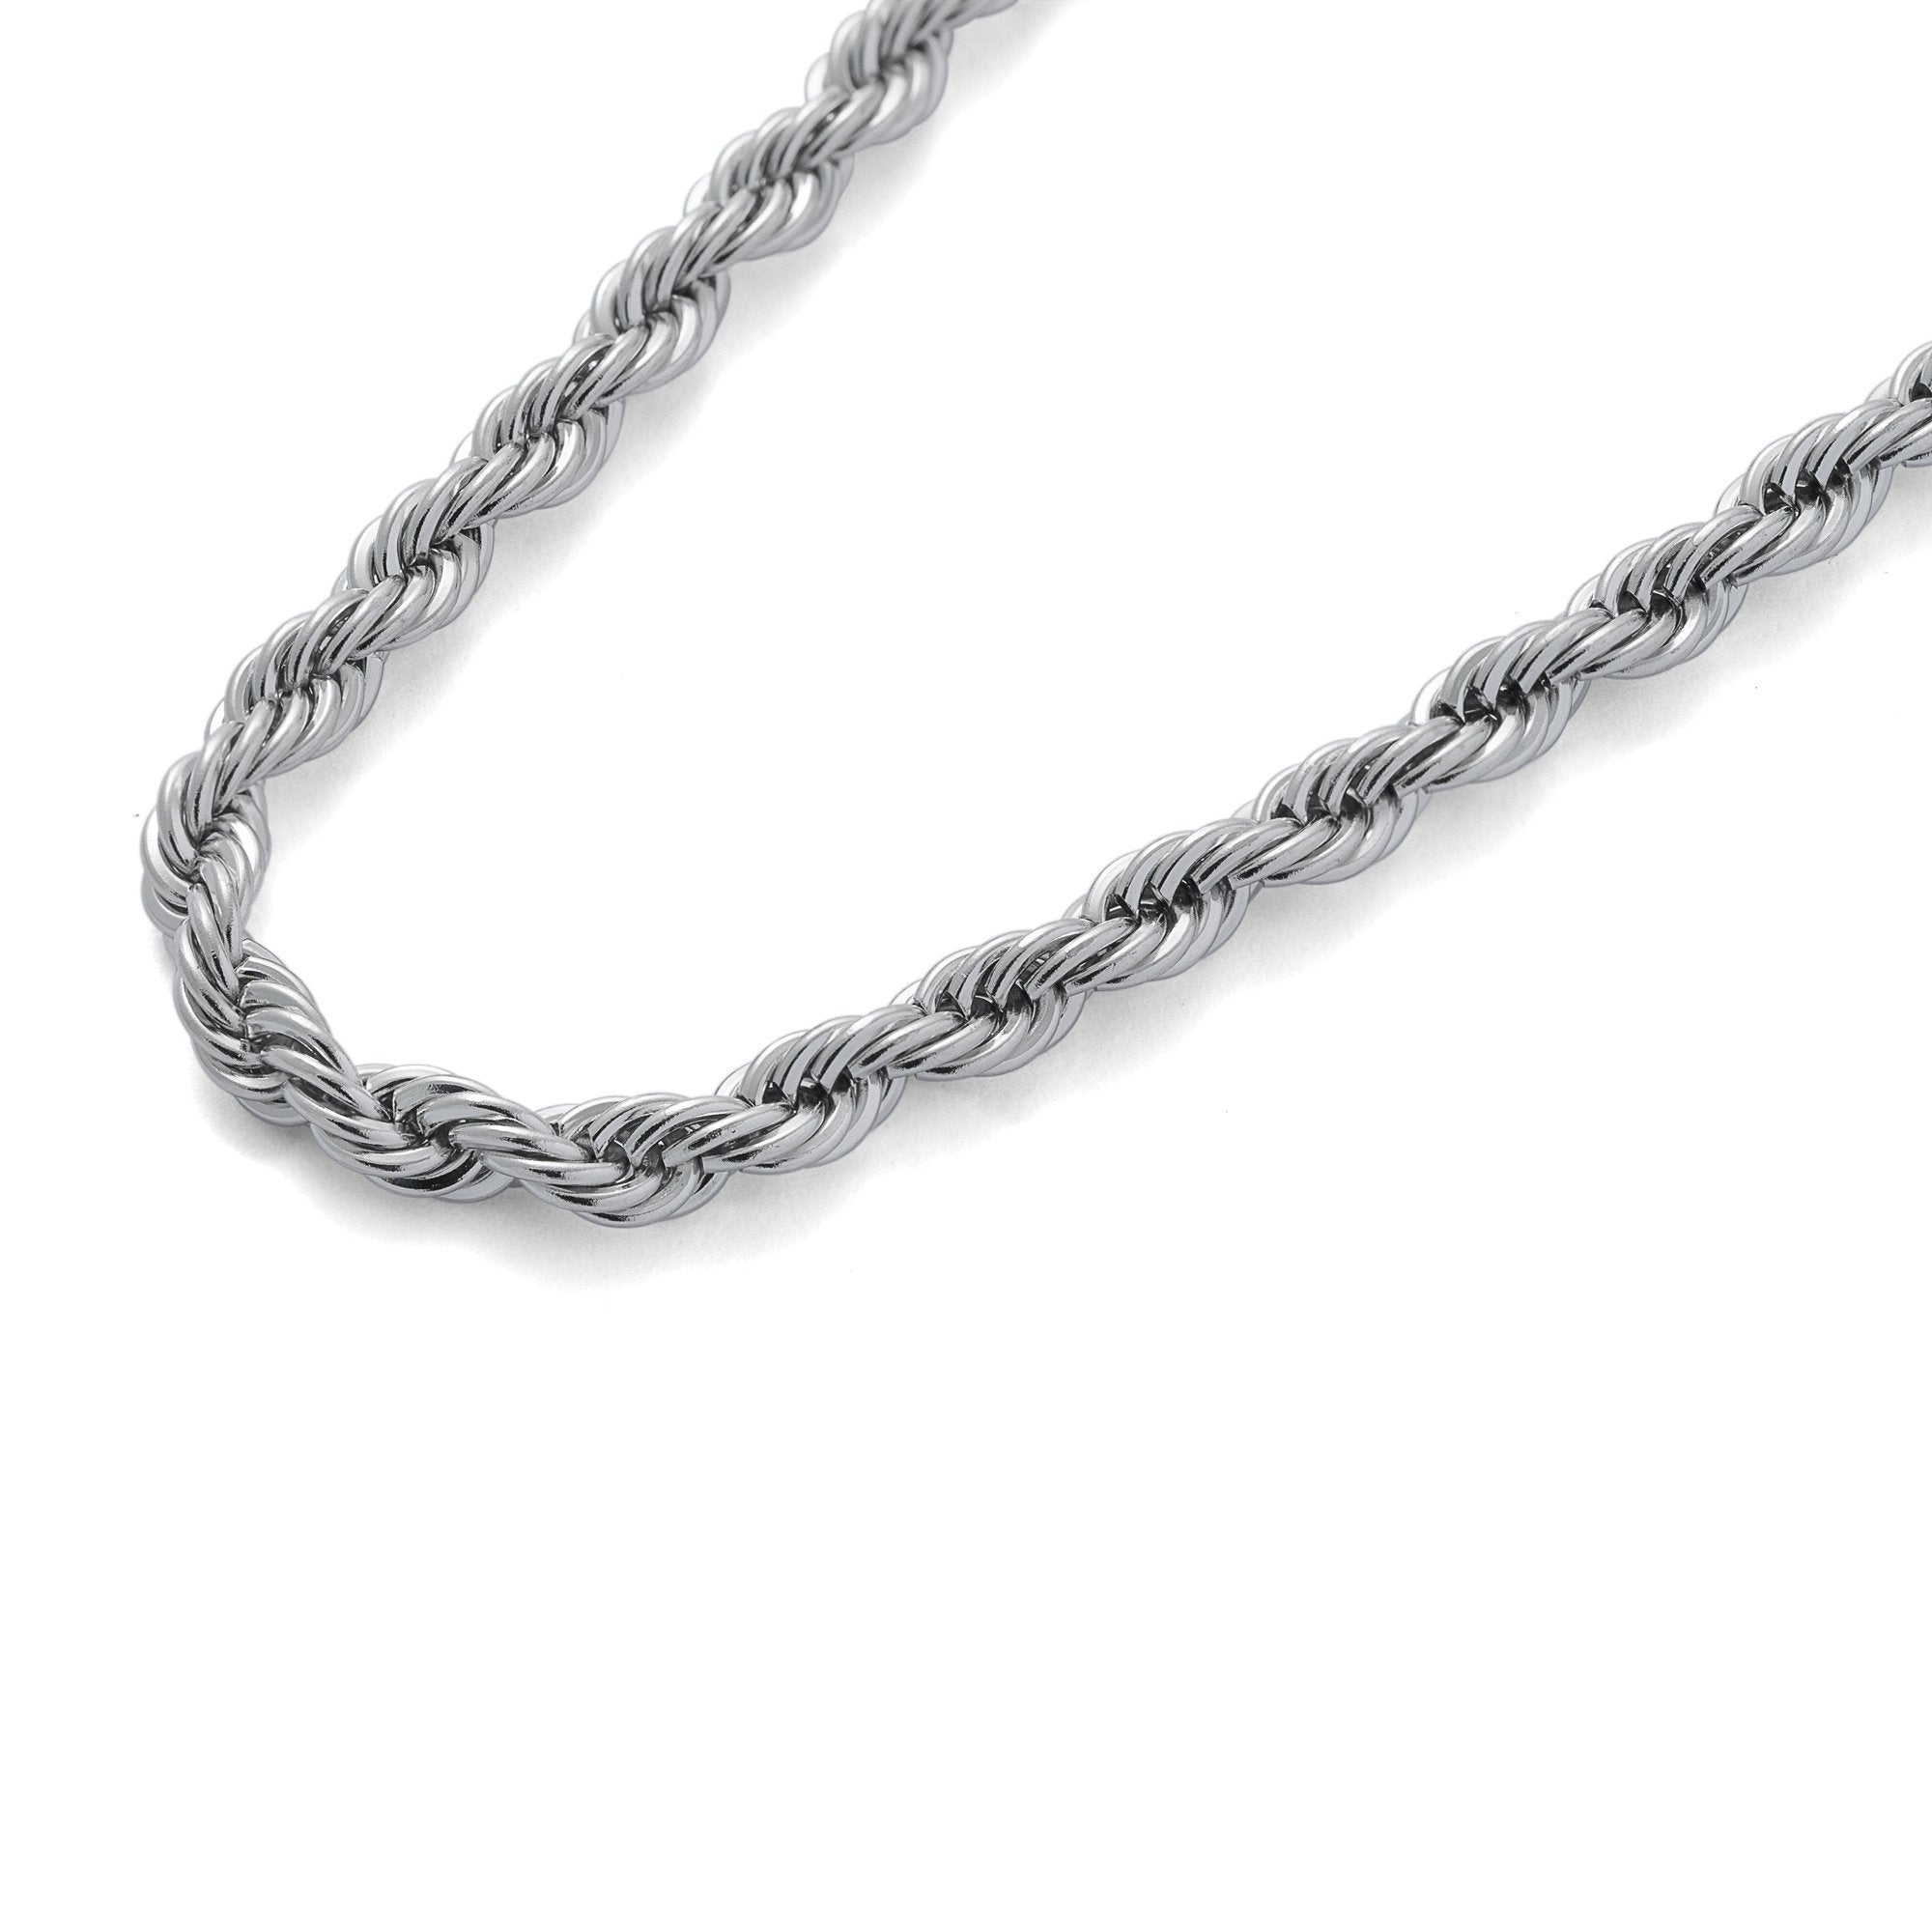 Rope Chain Mens Necklace by Statement Collective_02